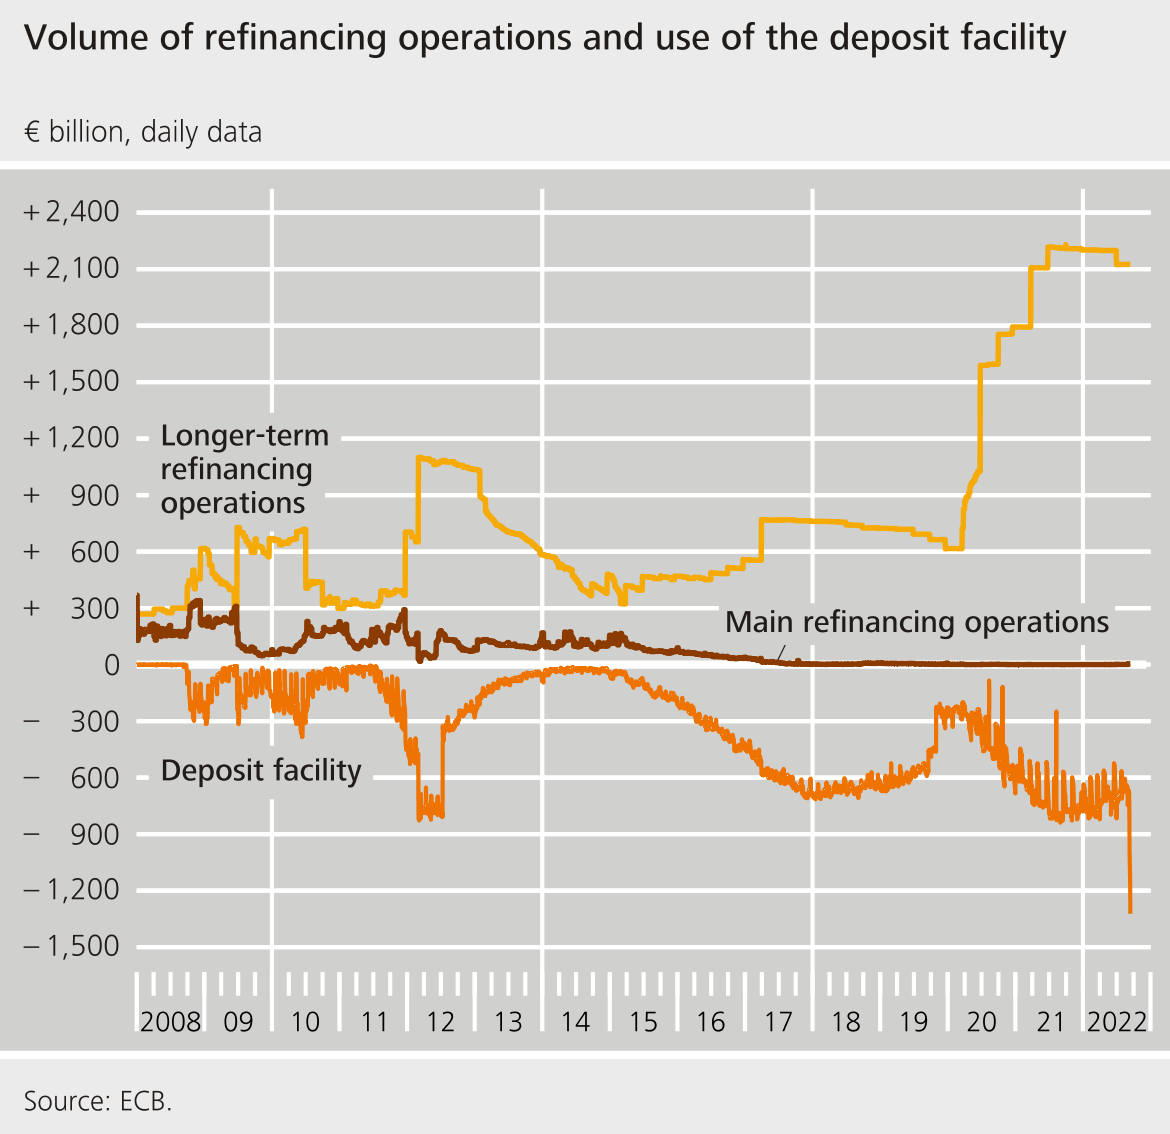 Volume of refinancing operations and use of the deposit facility